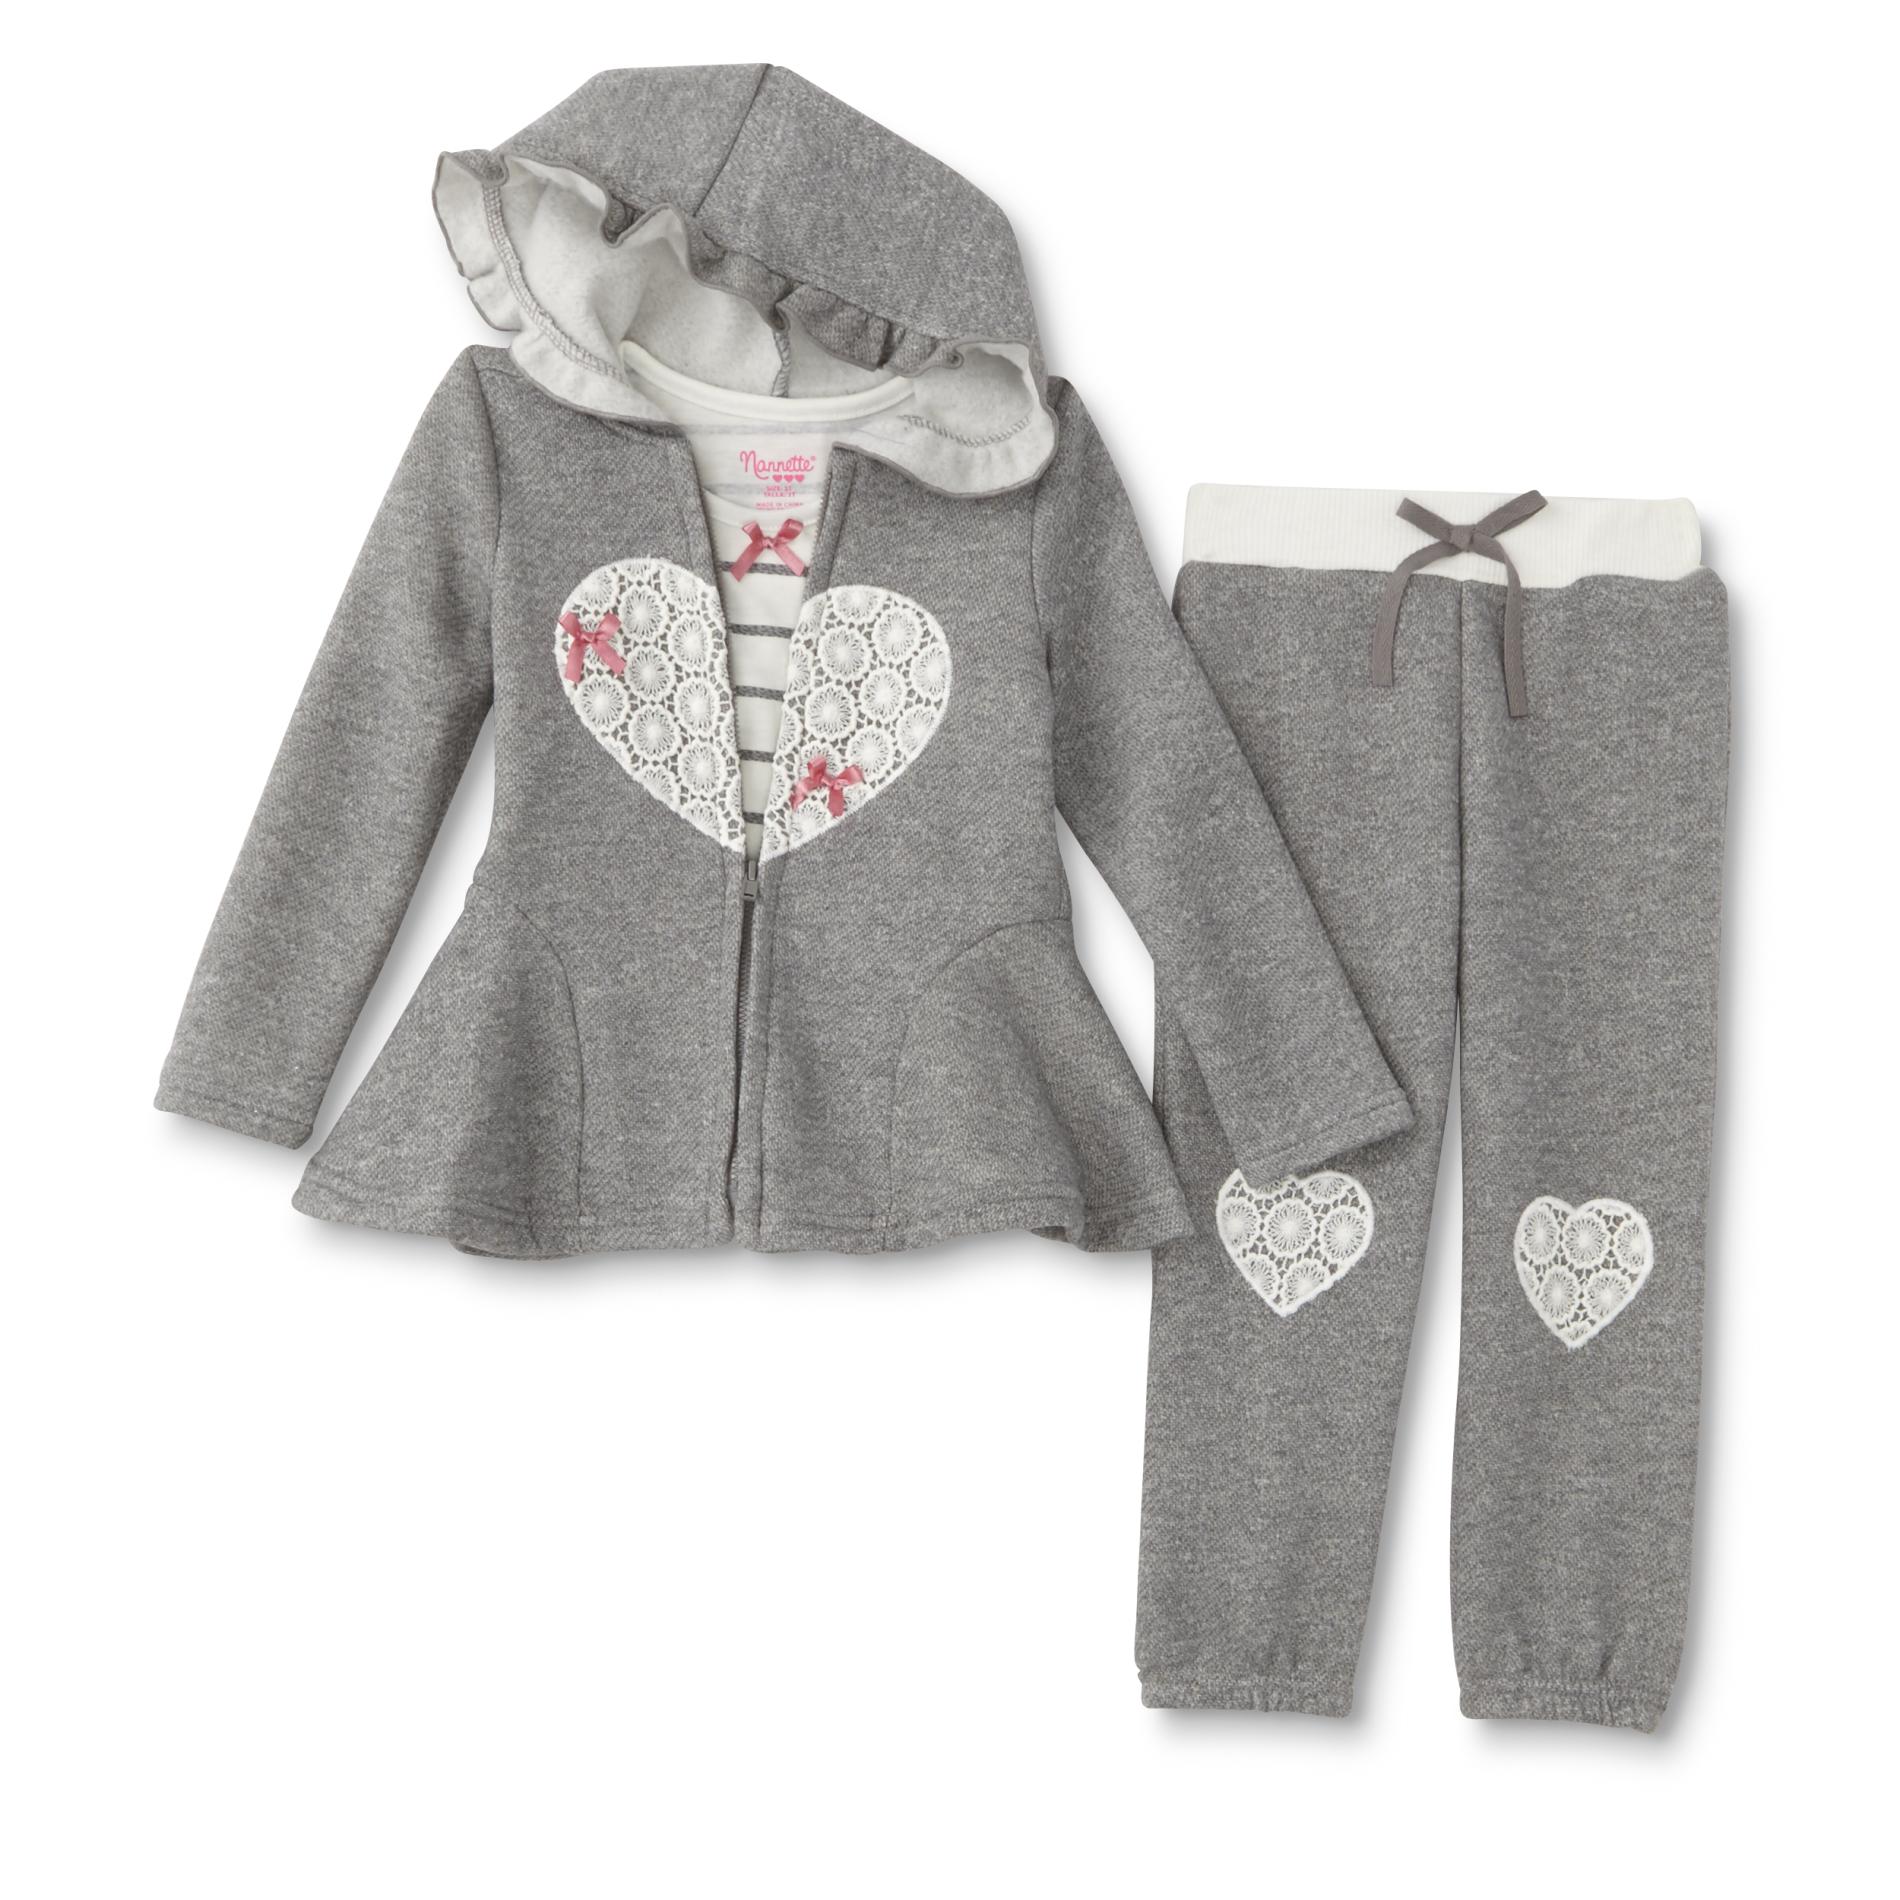 Young Hearts Infant & Toddler Girls' Hoodie Jacket, T-Shirt & Pants - Heart